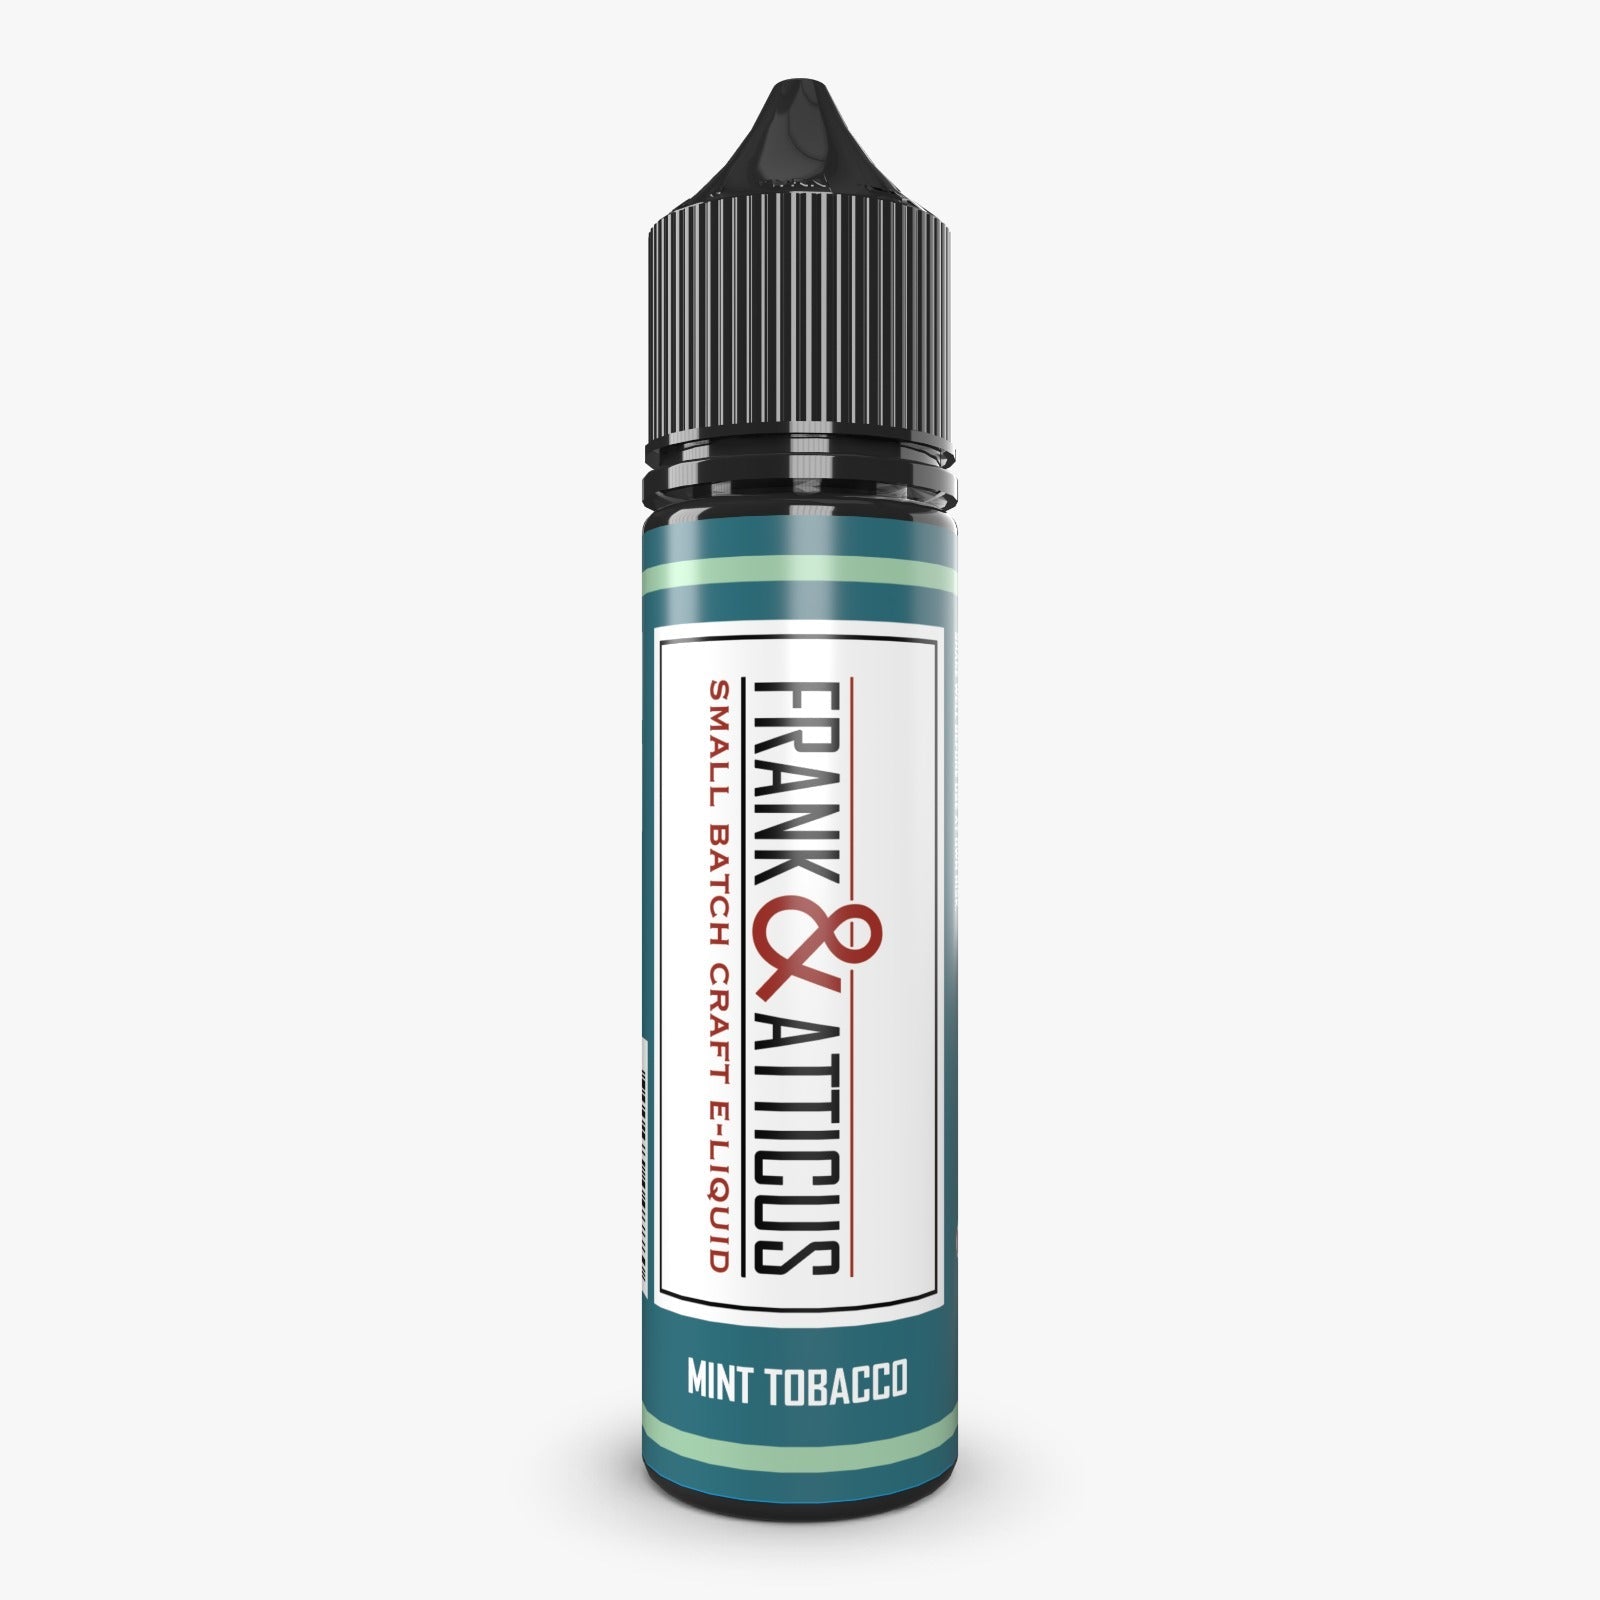 Buy Mint Tobacco By Frank and Atticus - Wick And Wire Co Melbourne Vape Shop, Victoria Australia